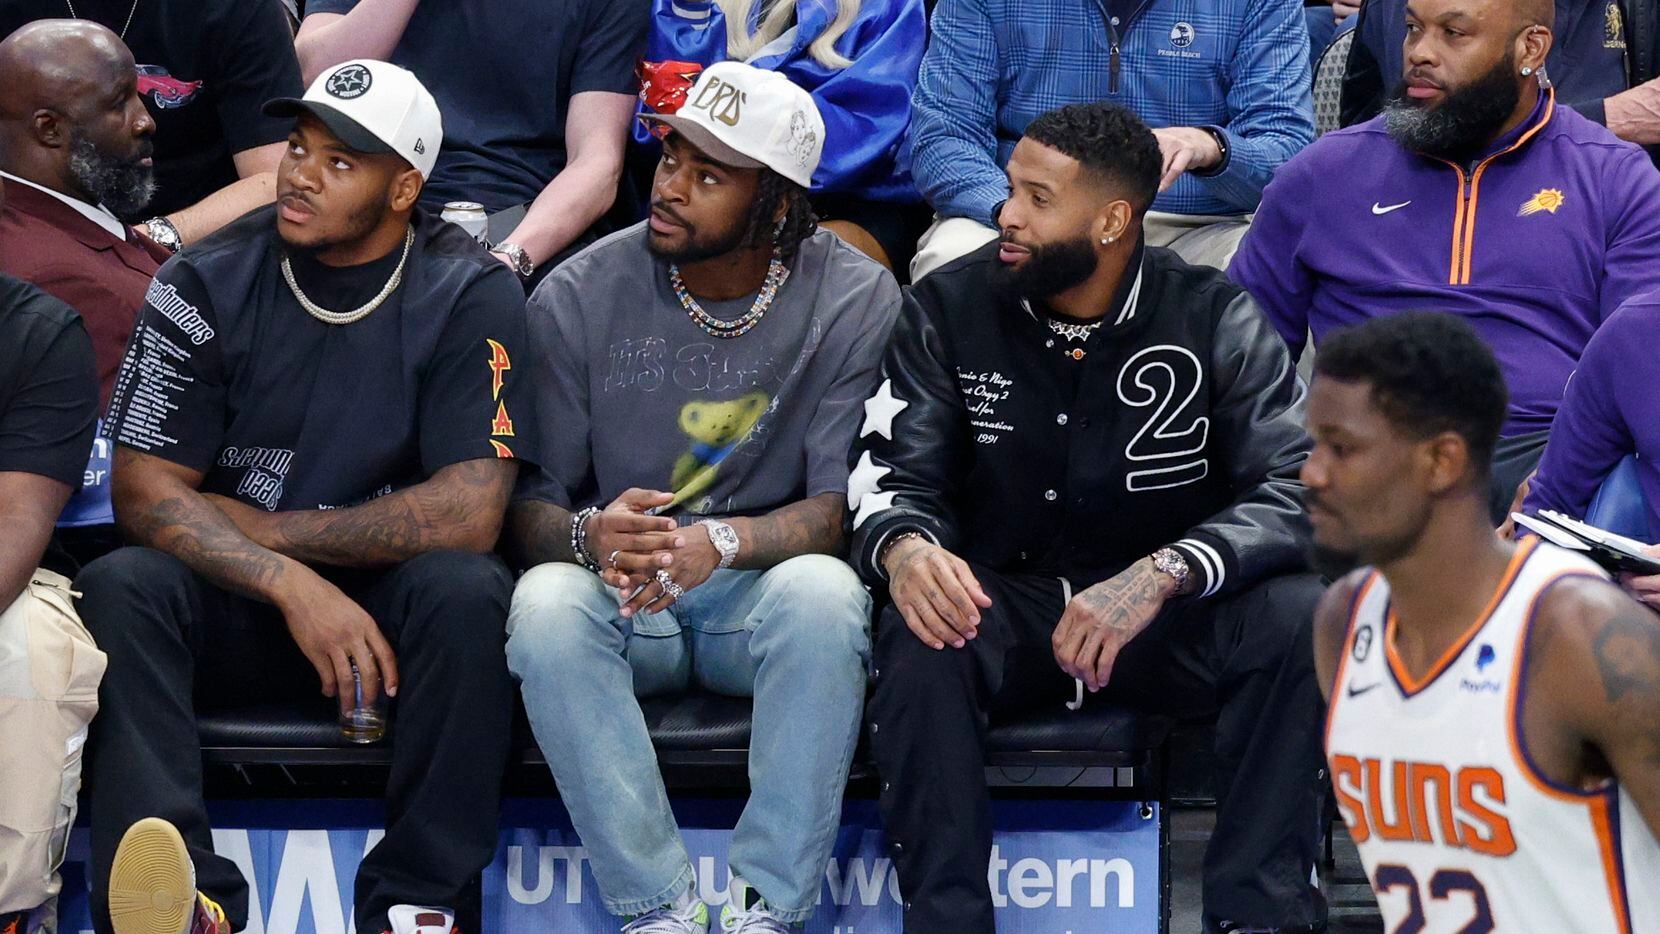 Dallas Cowboys players Micah Parsons (left) and Trevon Diggs sit with NFL free agent Odell...